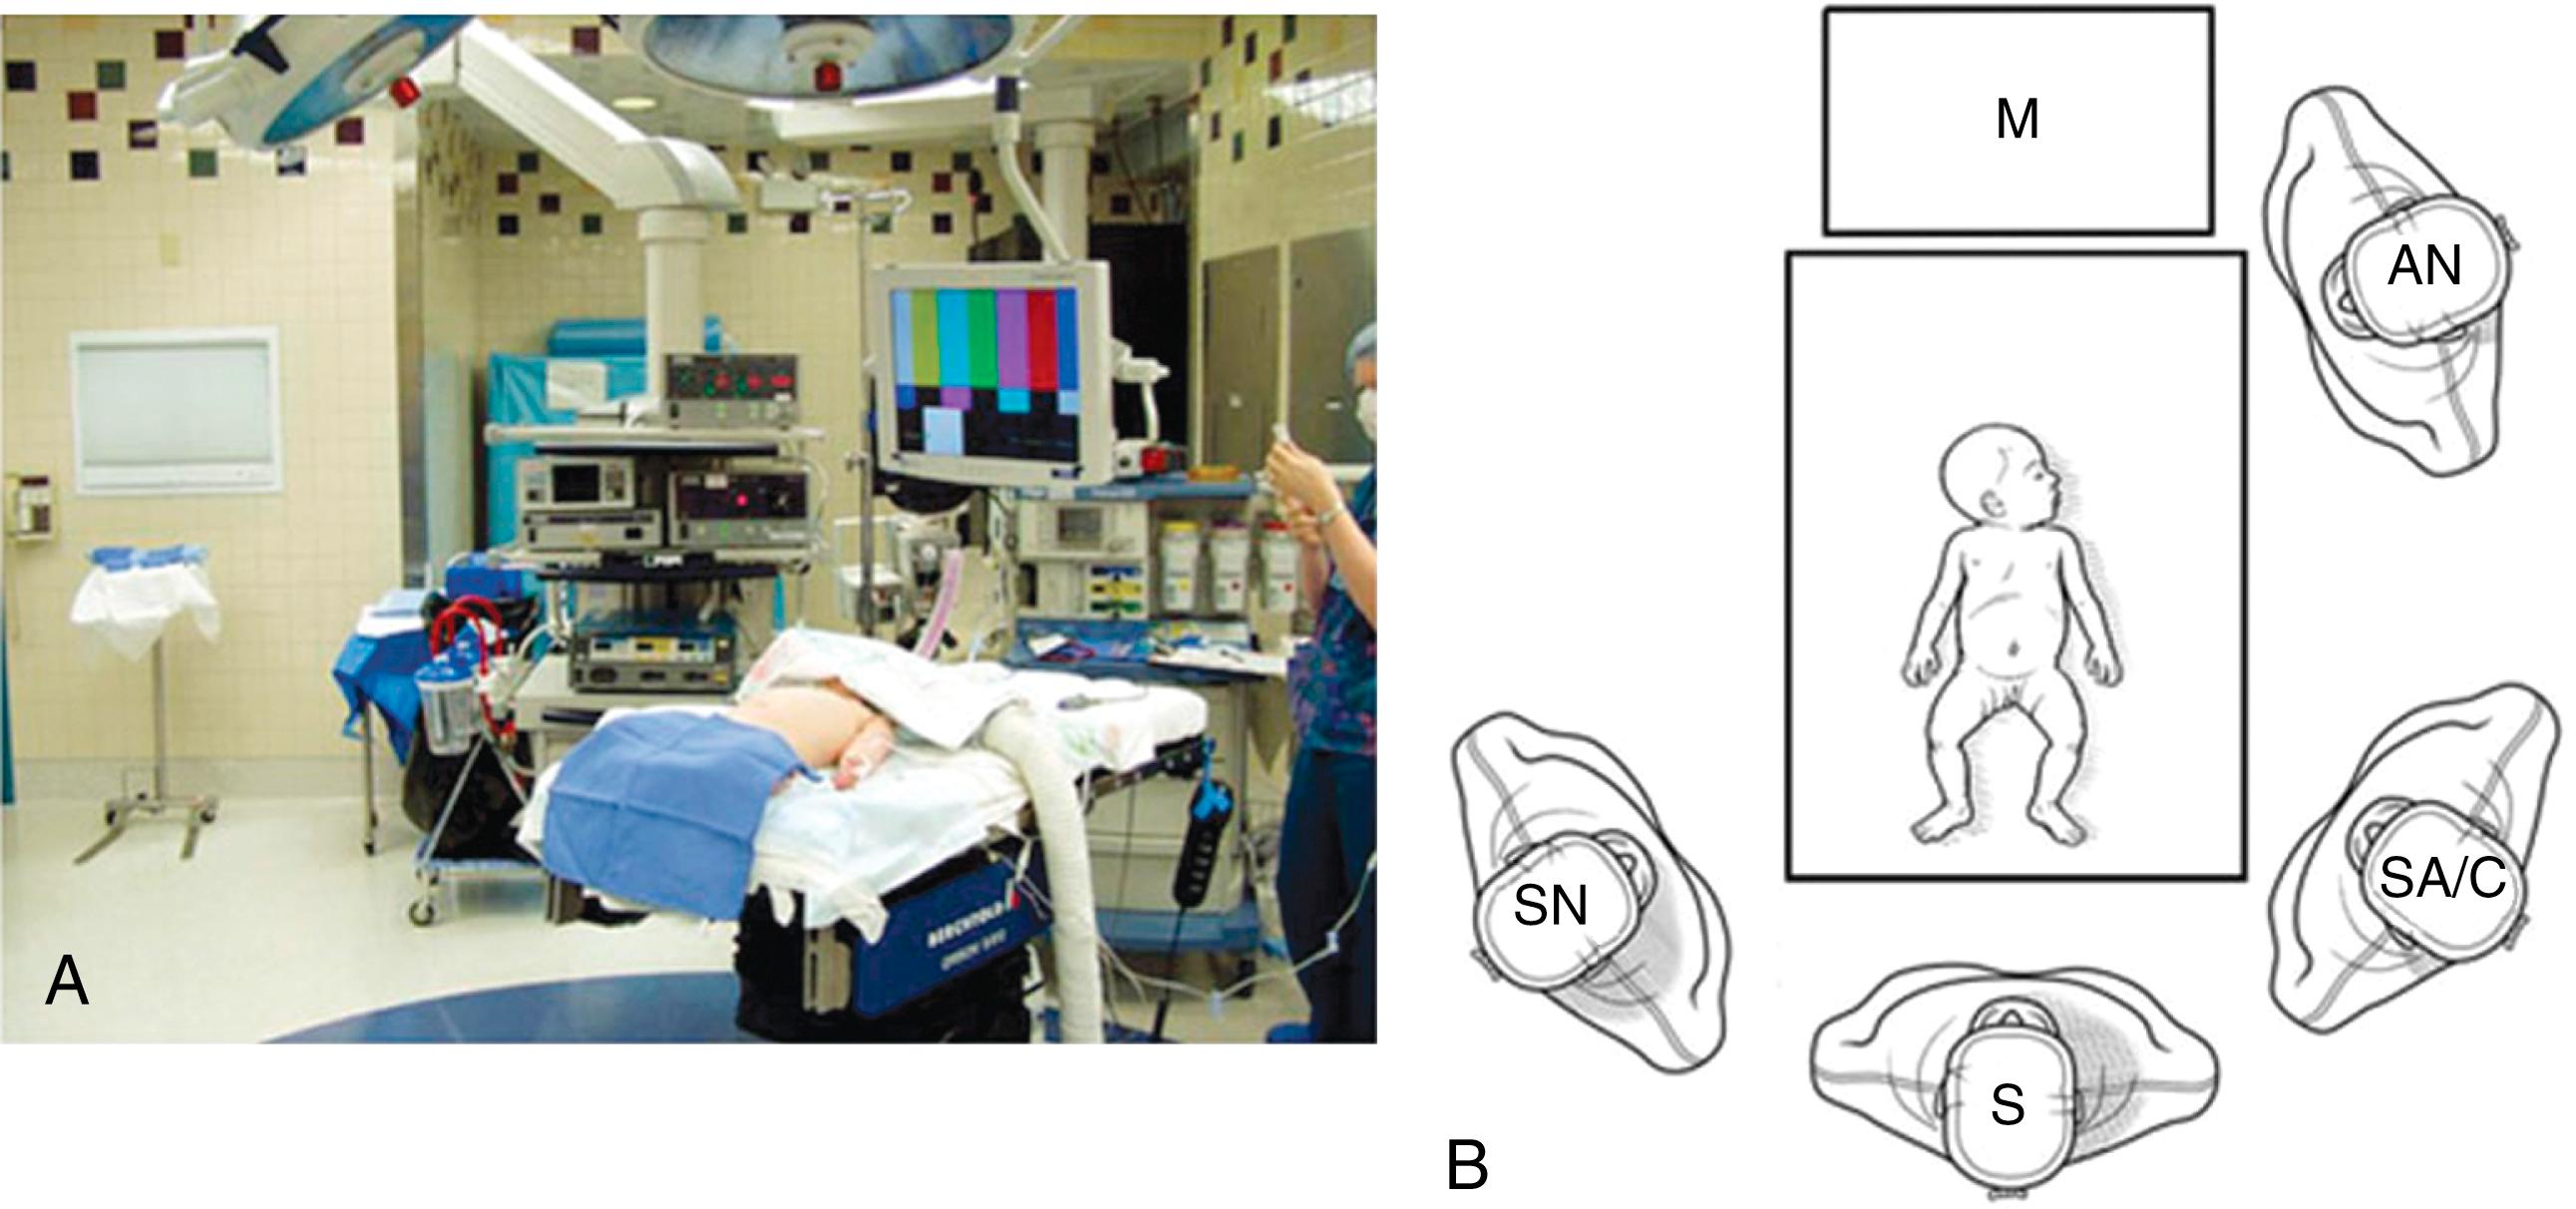 Fig. 2-1, For a laparoscopic fundoplication, the patient is placed supine on the operating table. A, Infants and young children are positioned at the foot of the bed in a frog-leg position, and the foot of the bed is dropped. B, The surgeon (S) and surgical assistant/camera holder (SA/C) stand next to the patient at the end of the bed. The surgical assistant is to the right of the surgeon and the scrub nurse (SN) is to the surgeon’s left. A single monitor (M) is used and is positioned over and cephalad to the patient’s head. AN, anesthesiologist.